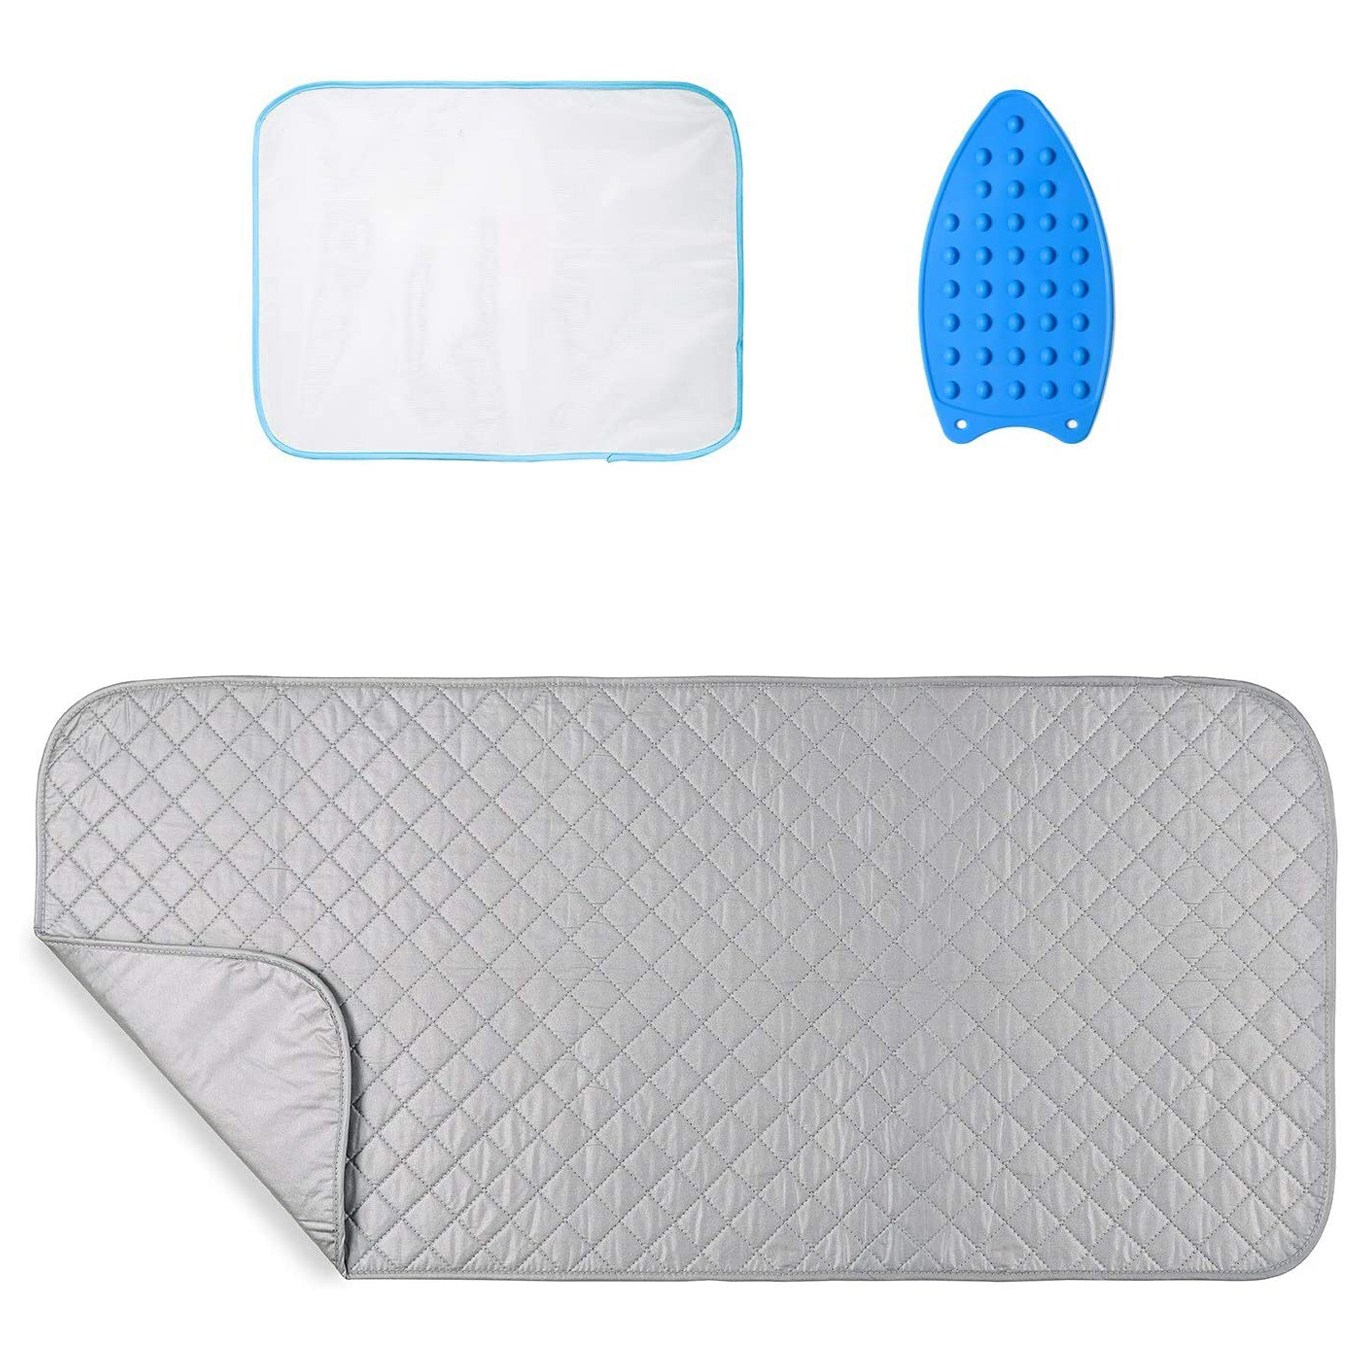 Ironing Mat,Cotton Thickened Portable Ironing Blanket, Water Absorbent Pad  Cover for Washer Table Silicone Iron Rest Pad